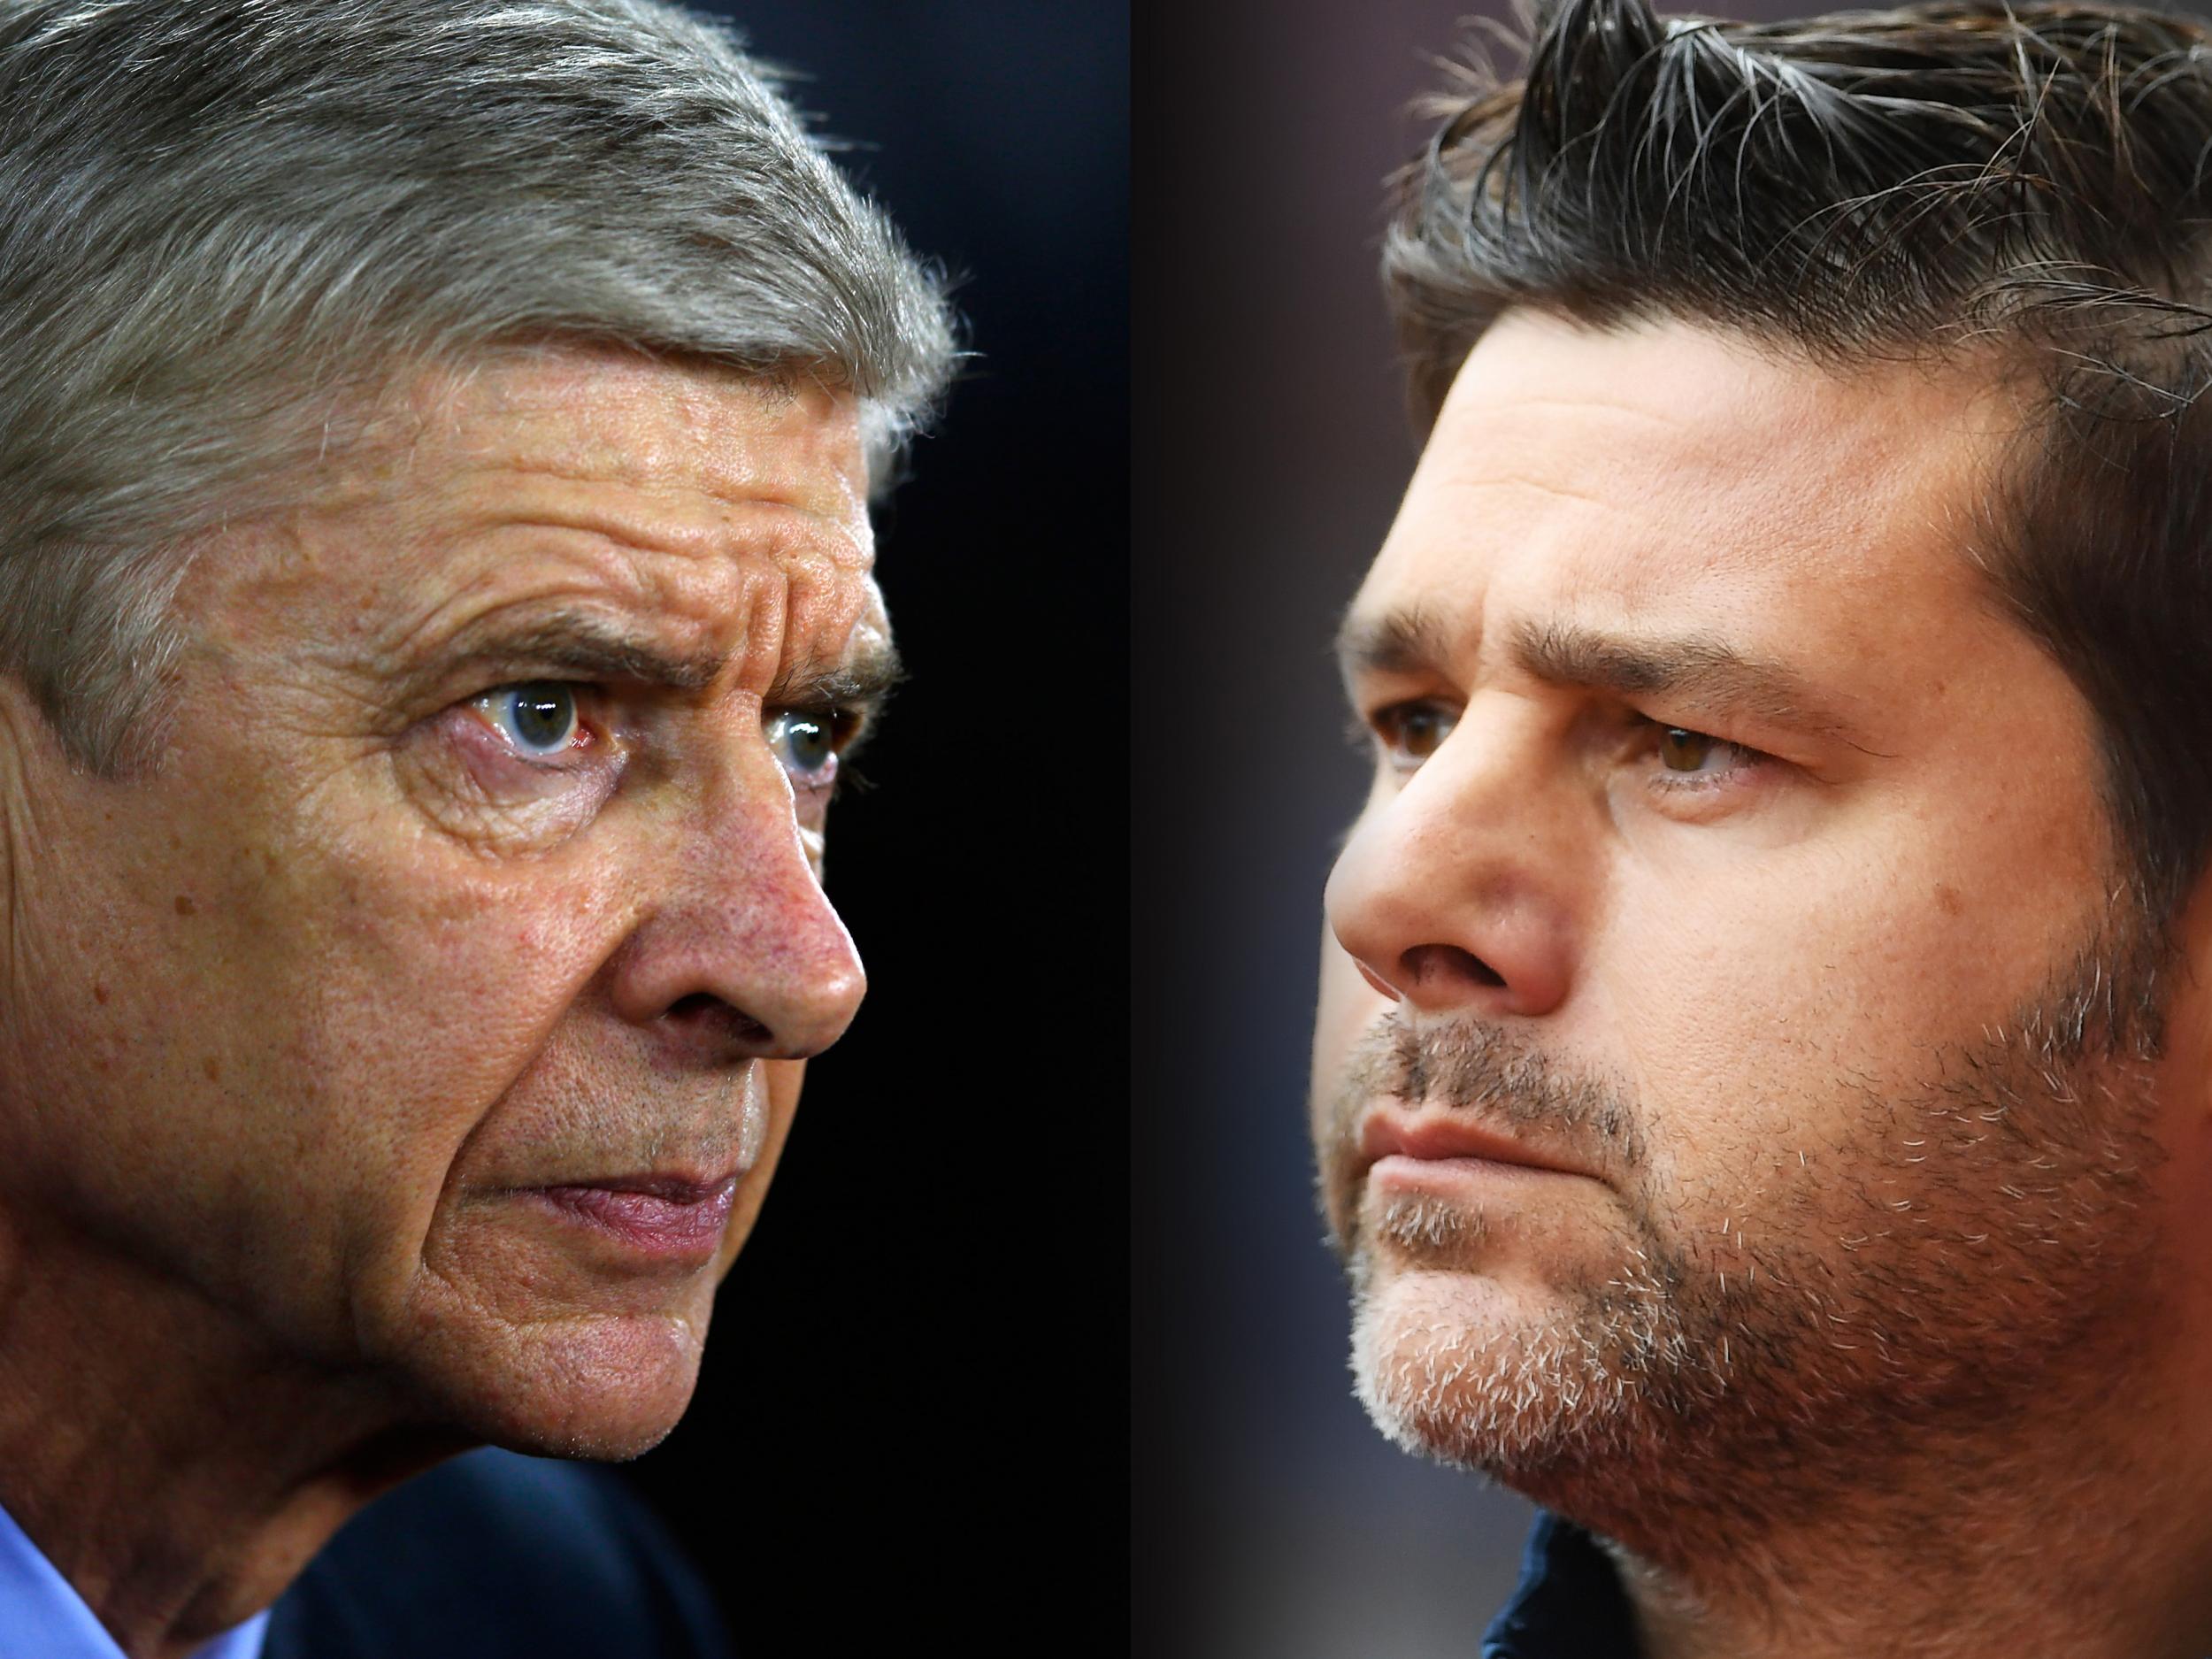 Pochettino has revolutionised something that Wenger used to be at the forefront of